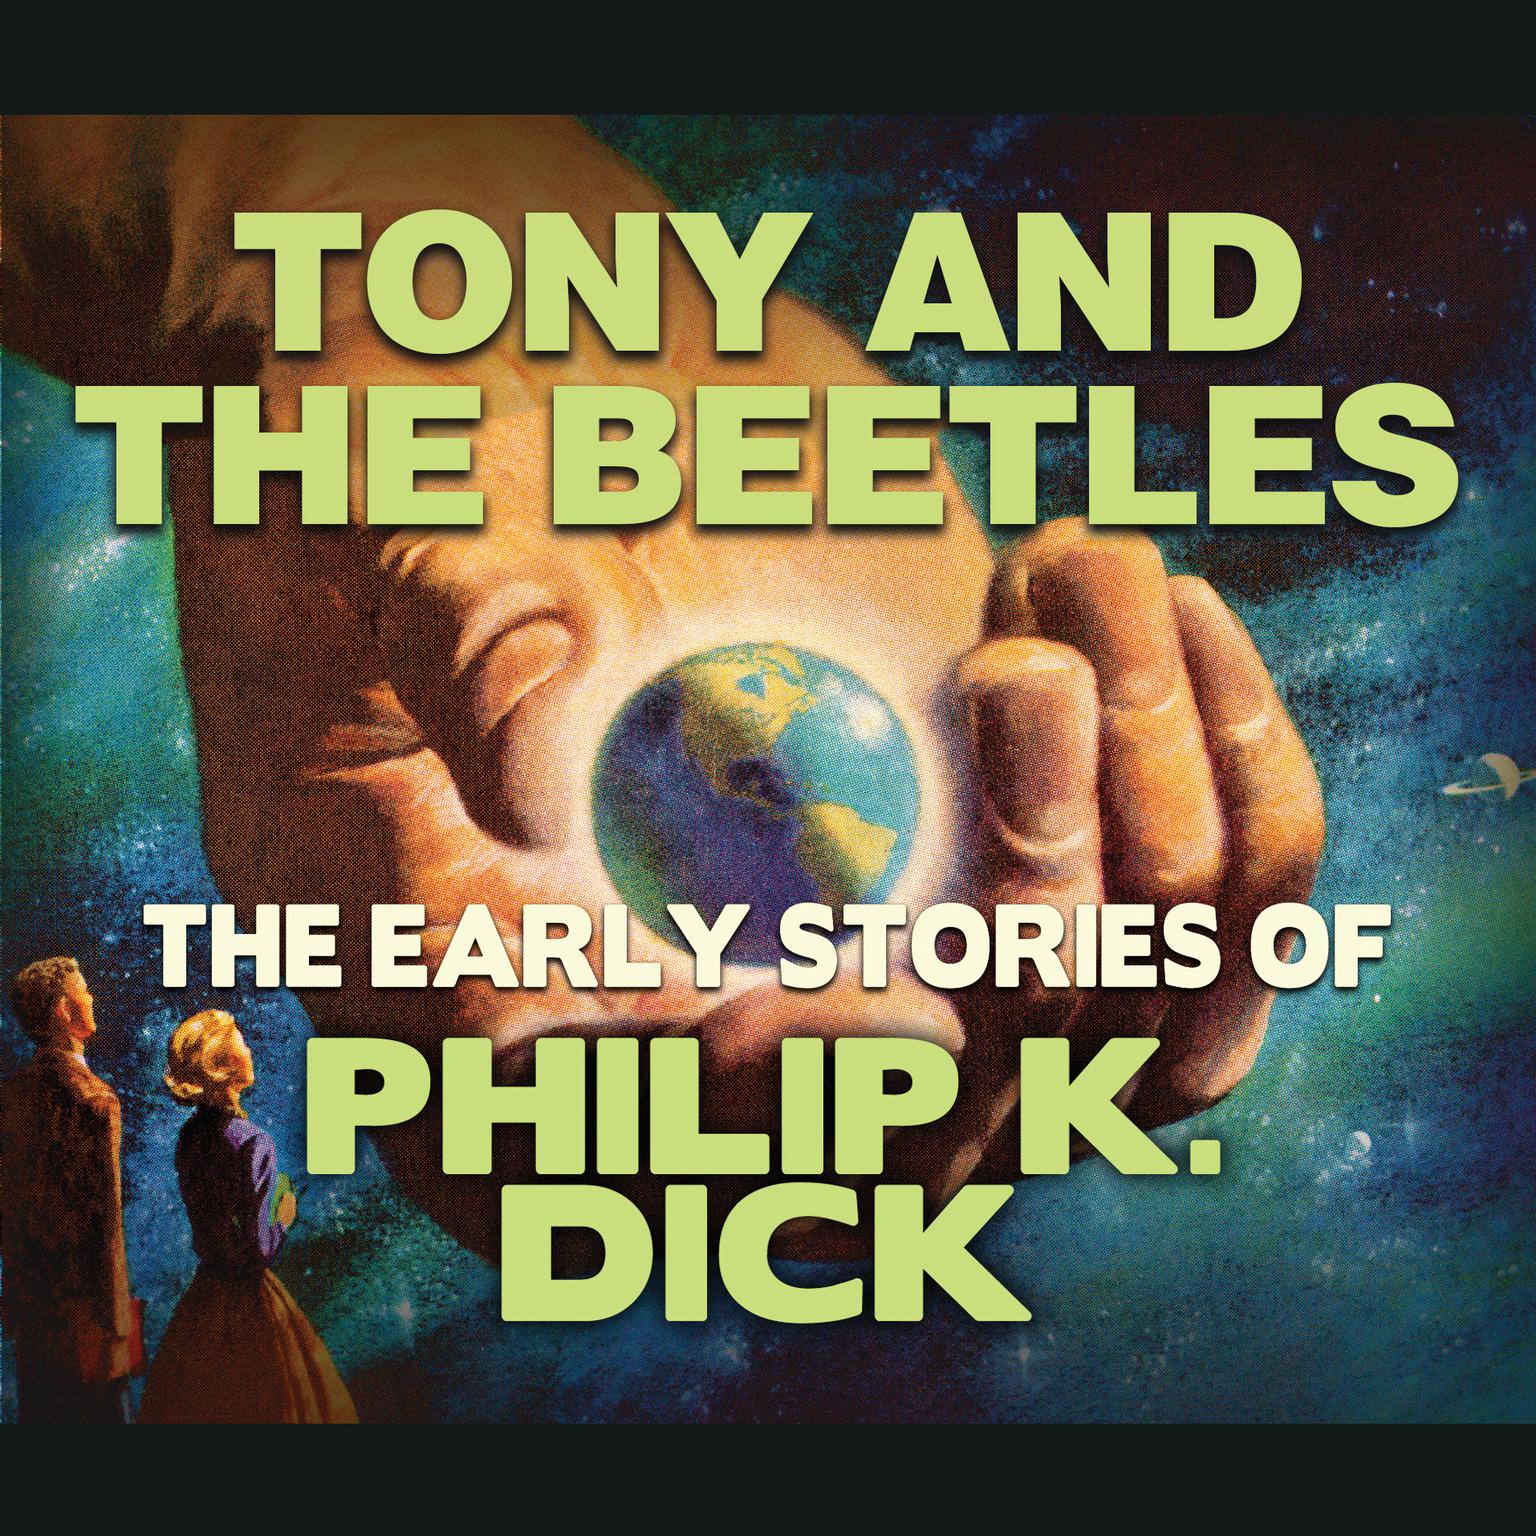 Tony and the Beetles Audiobook, by Philip K. Dick